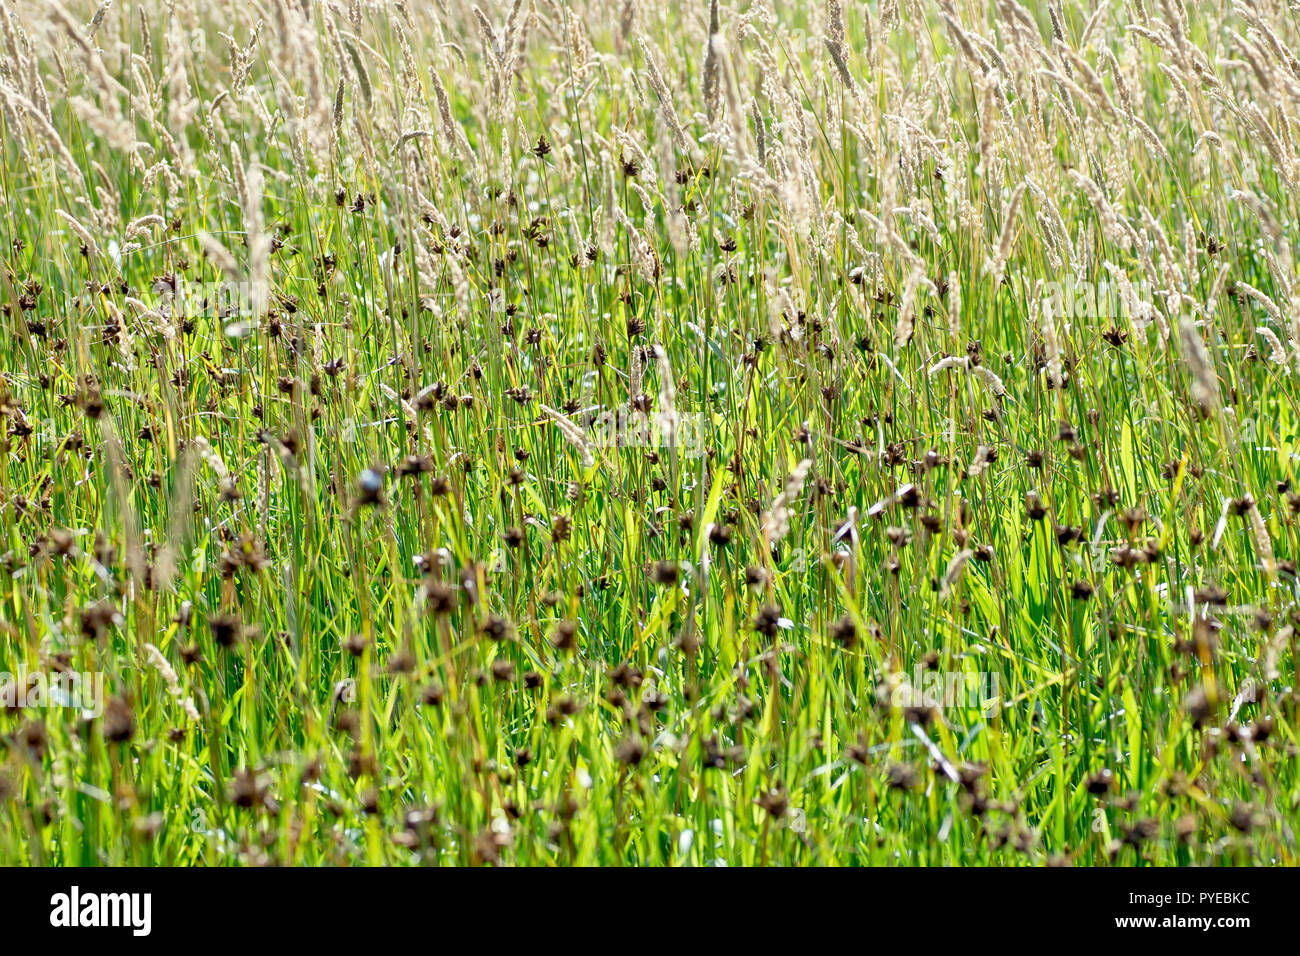 An abstract image of backlit reeds, sedges and tall grasses growing at the side of a pond. Stock Photo